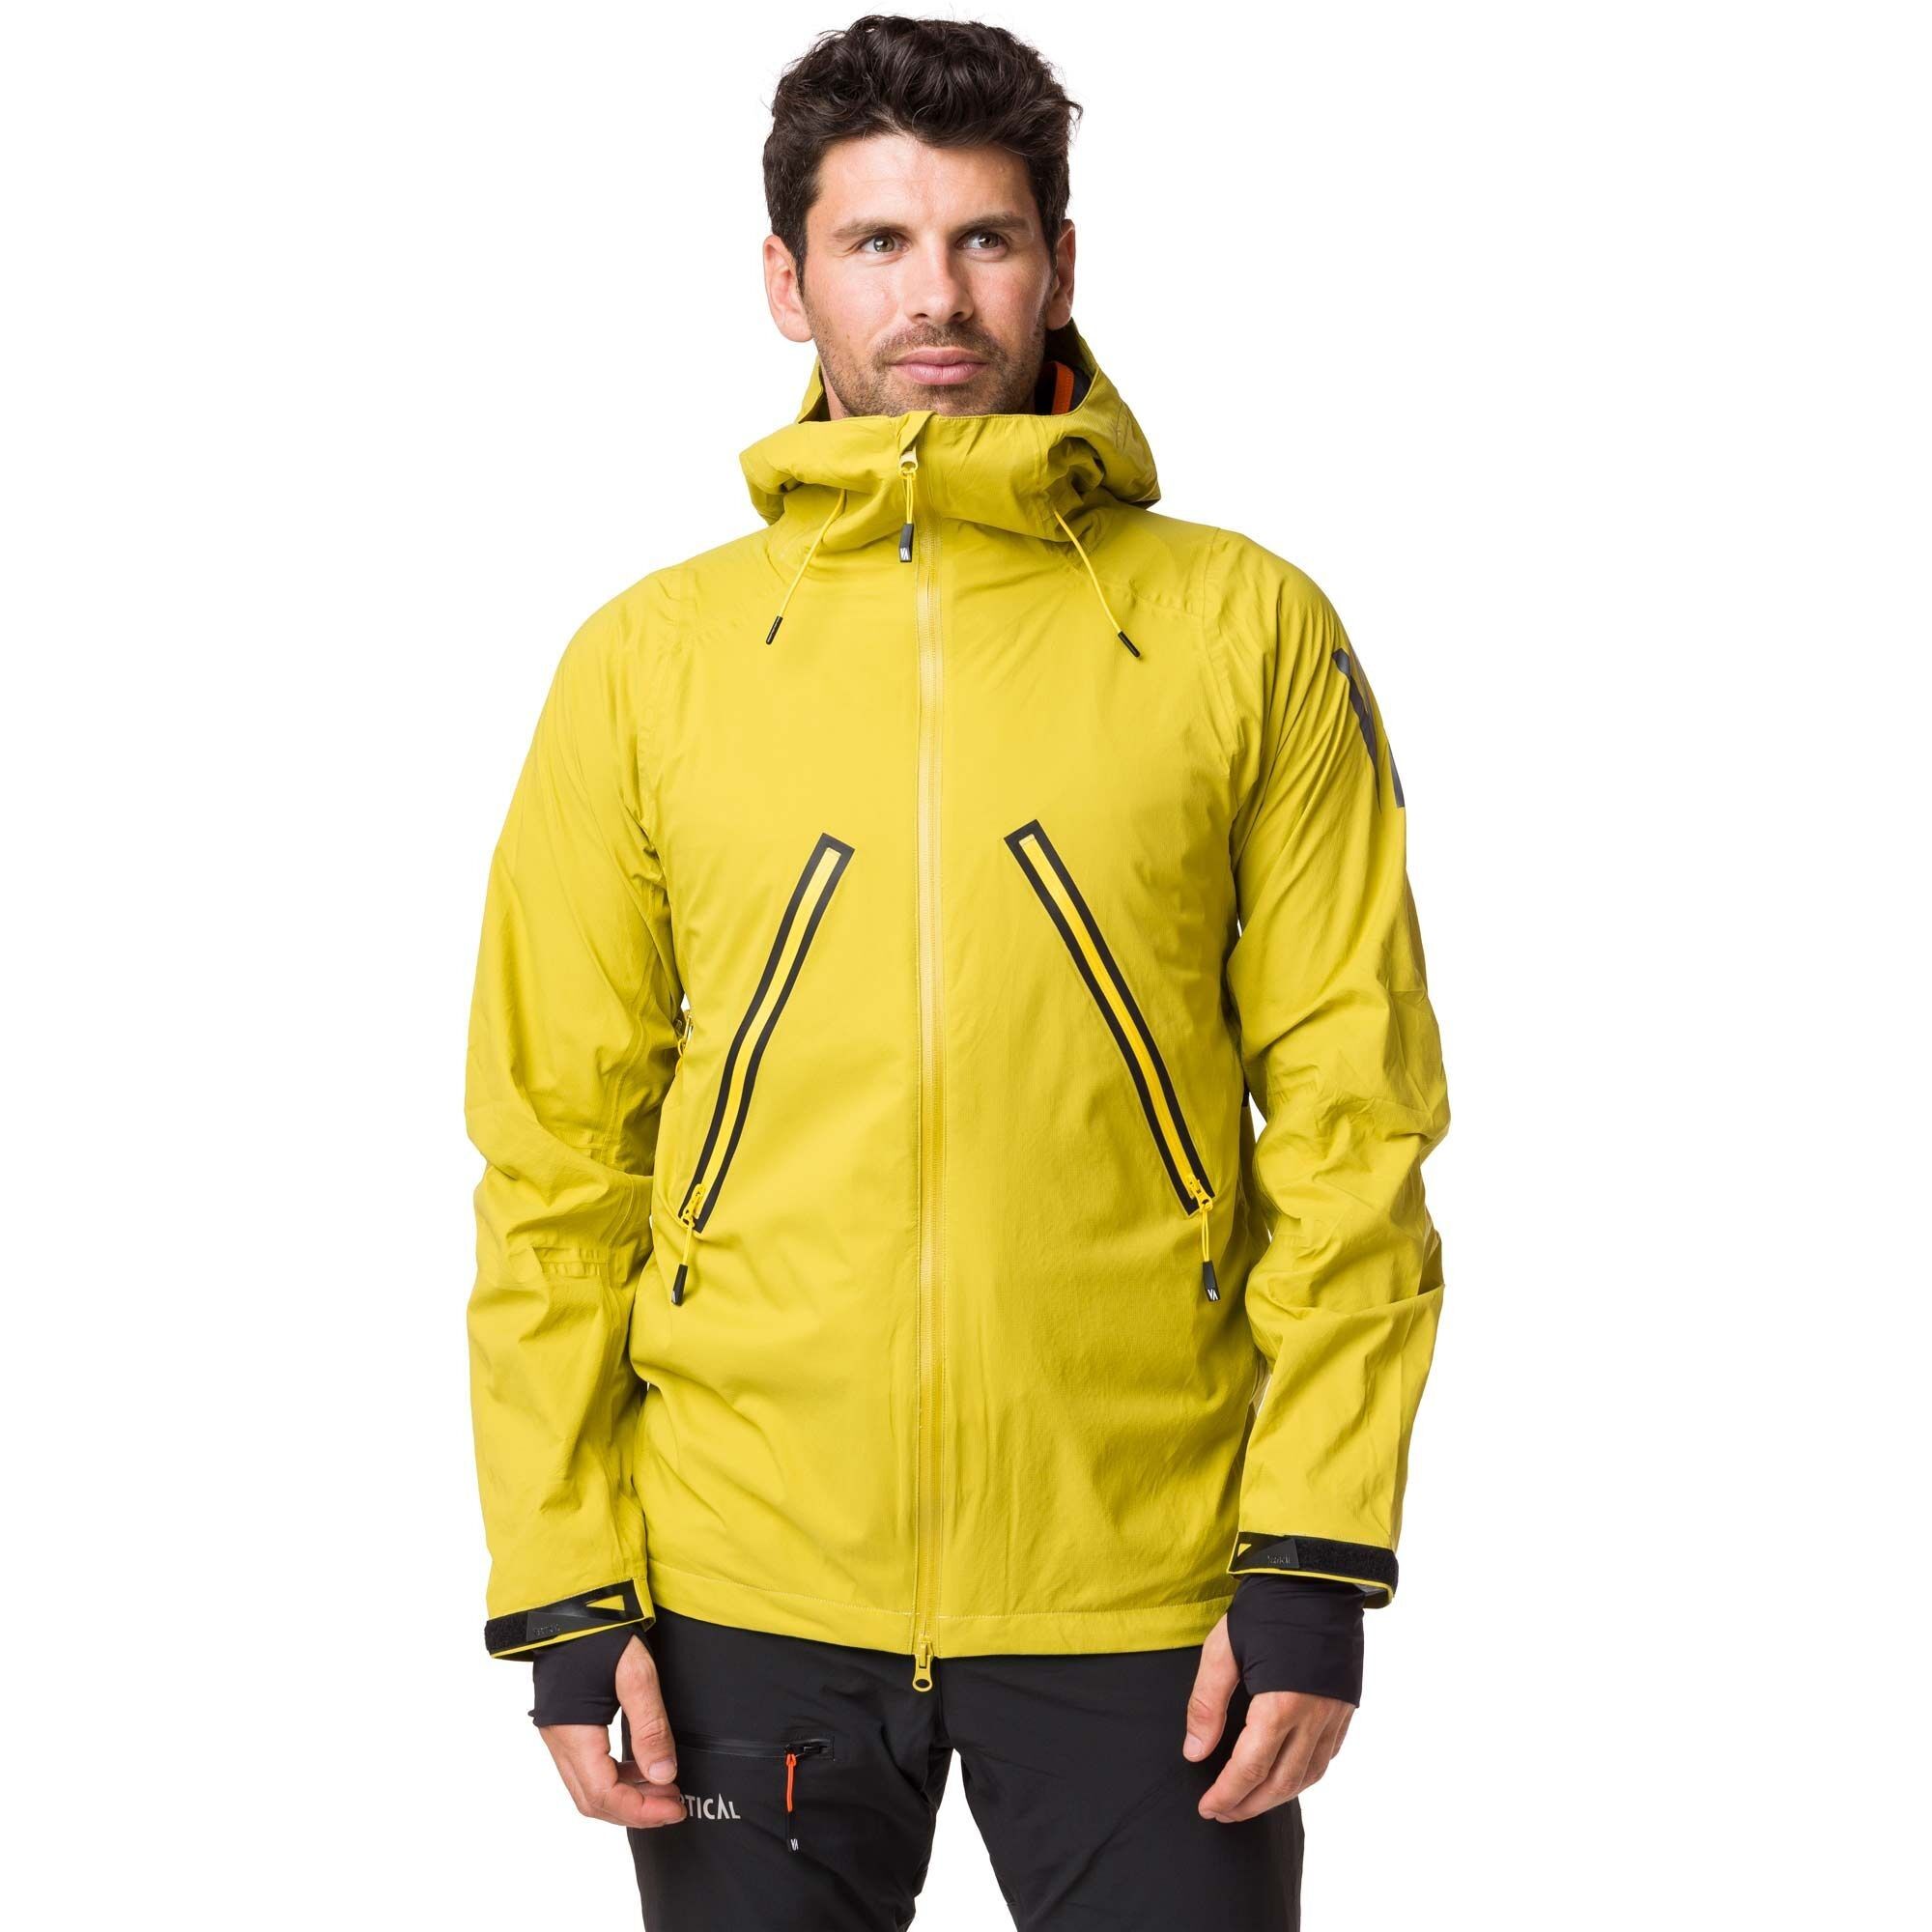 Vertical Windy MP+ Jacket - Chaqueta impermeable - Hombre